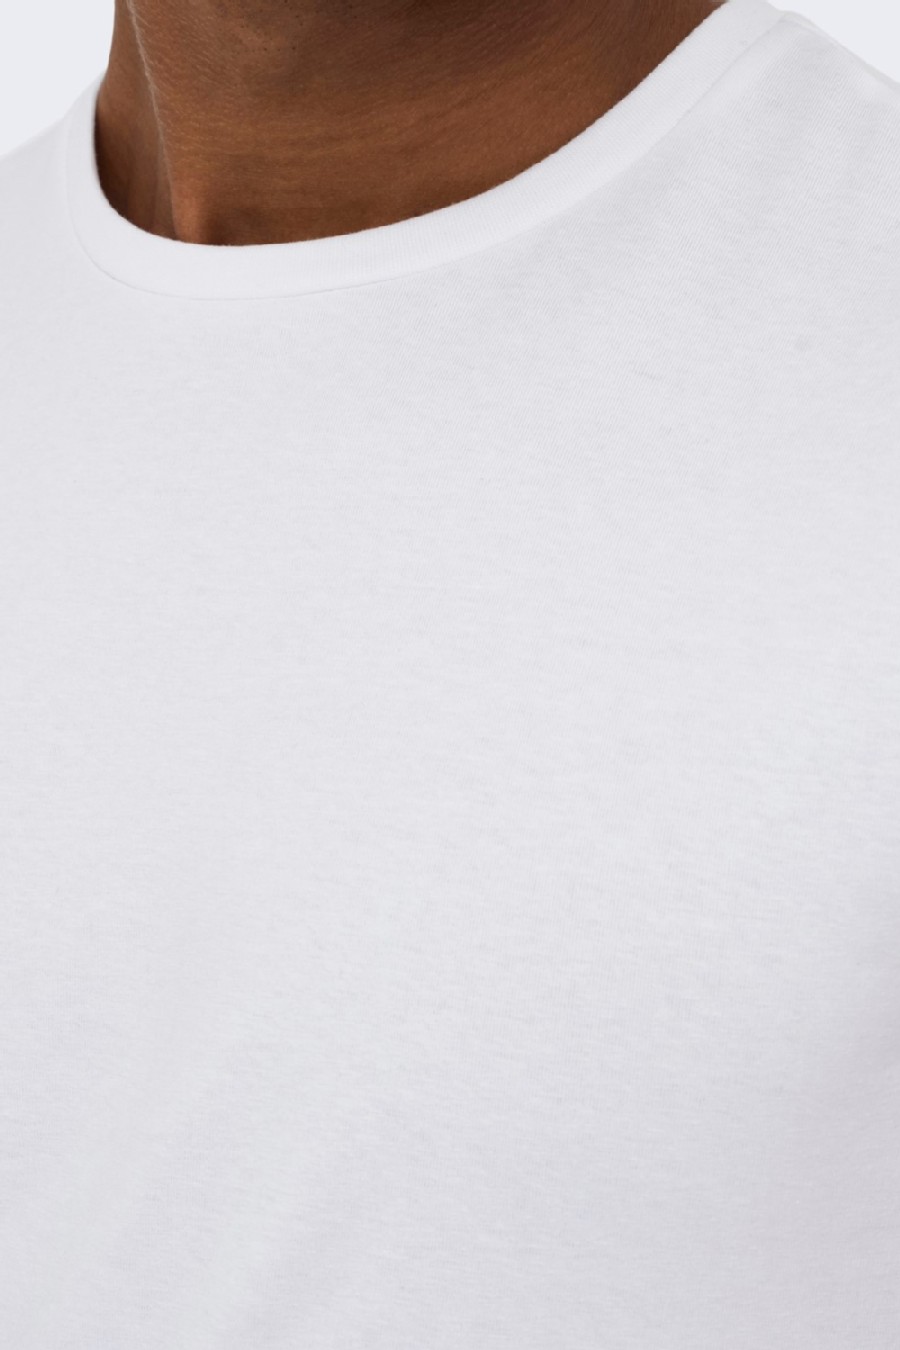 T-krekls ONLY & SONS 22021181-White